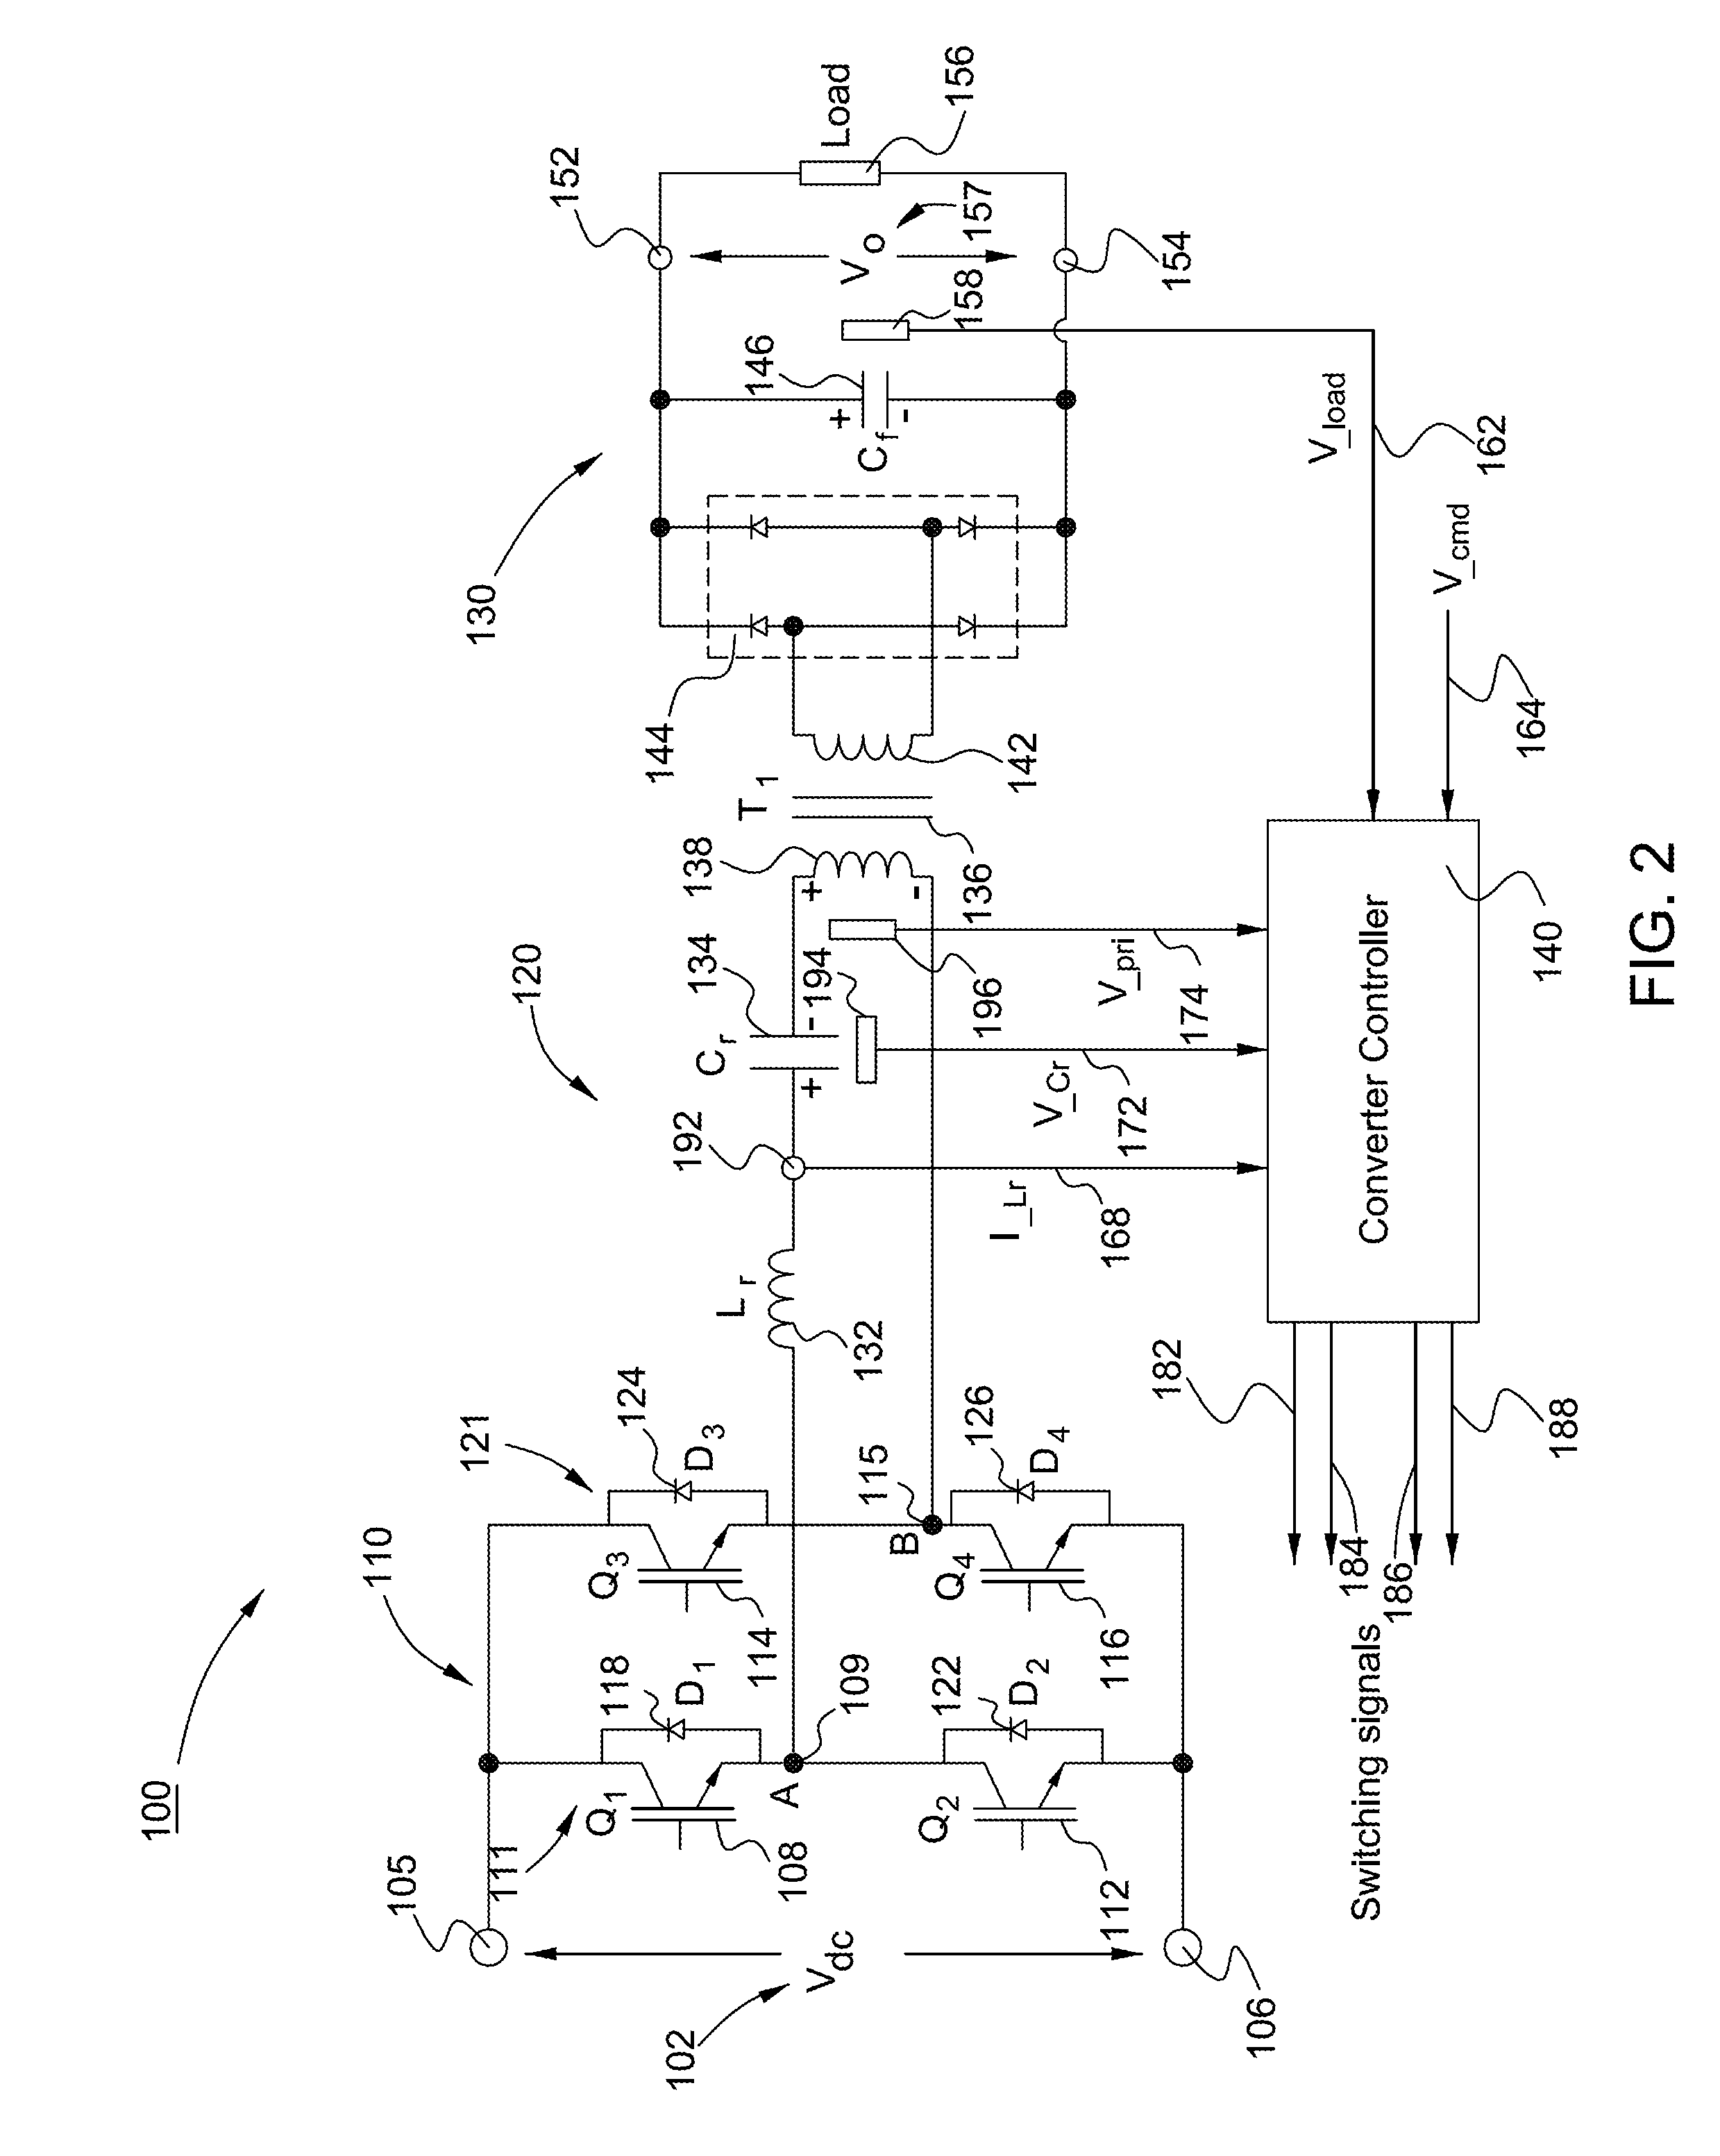 System and method for series resonant converter protection